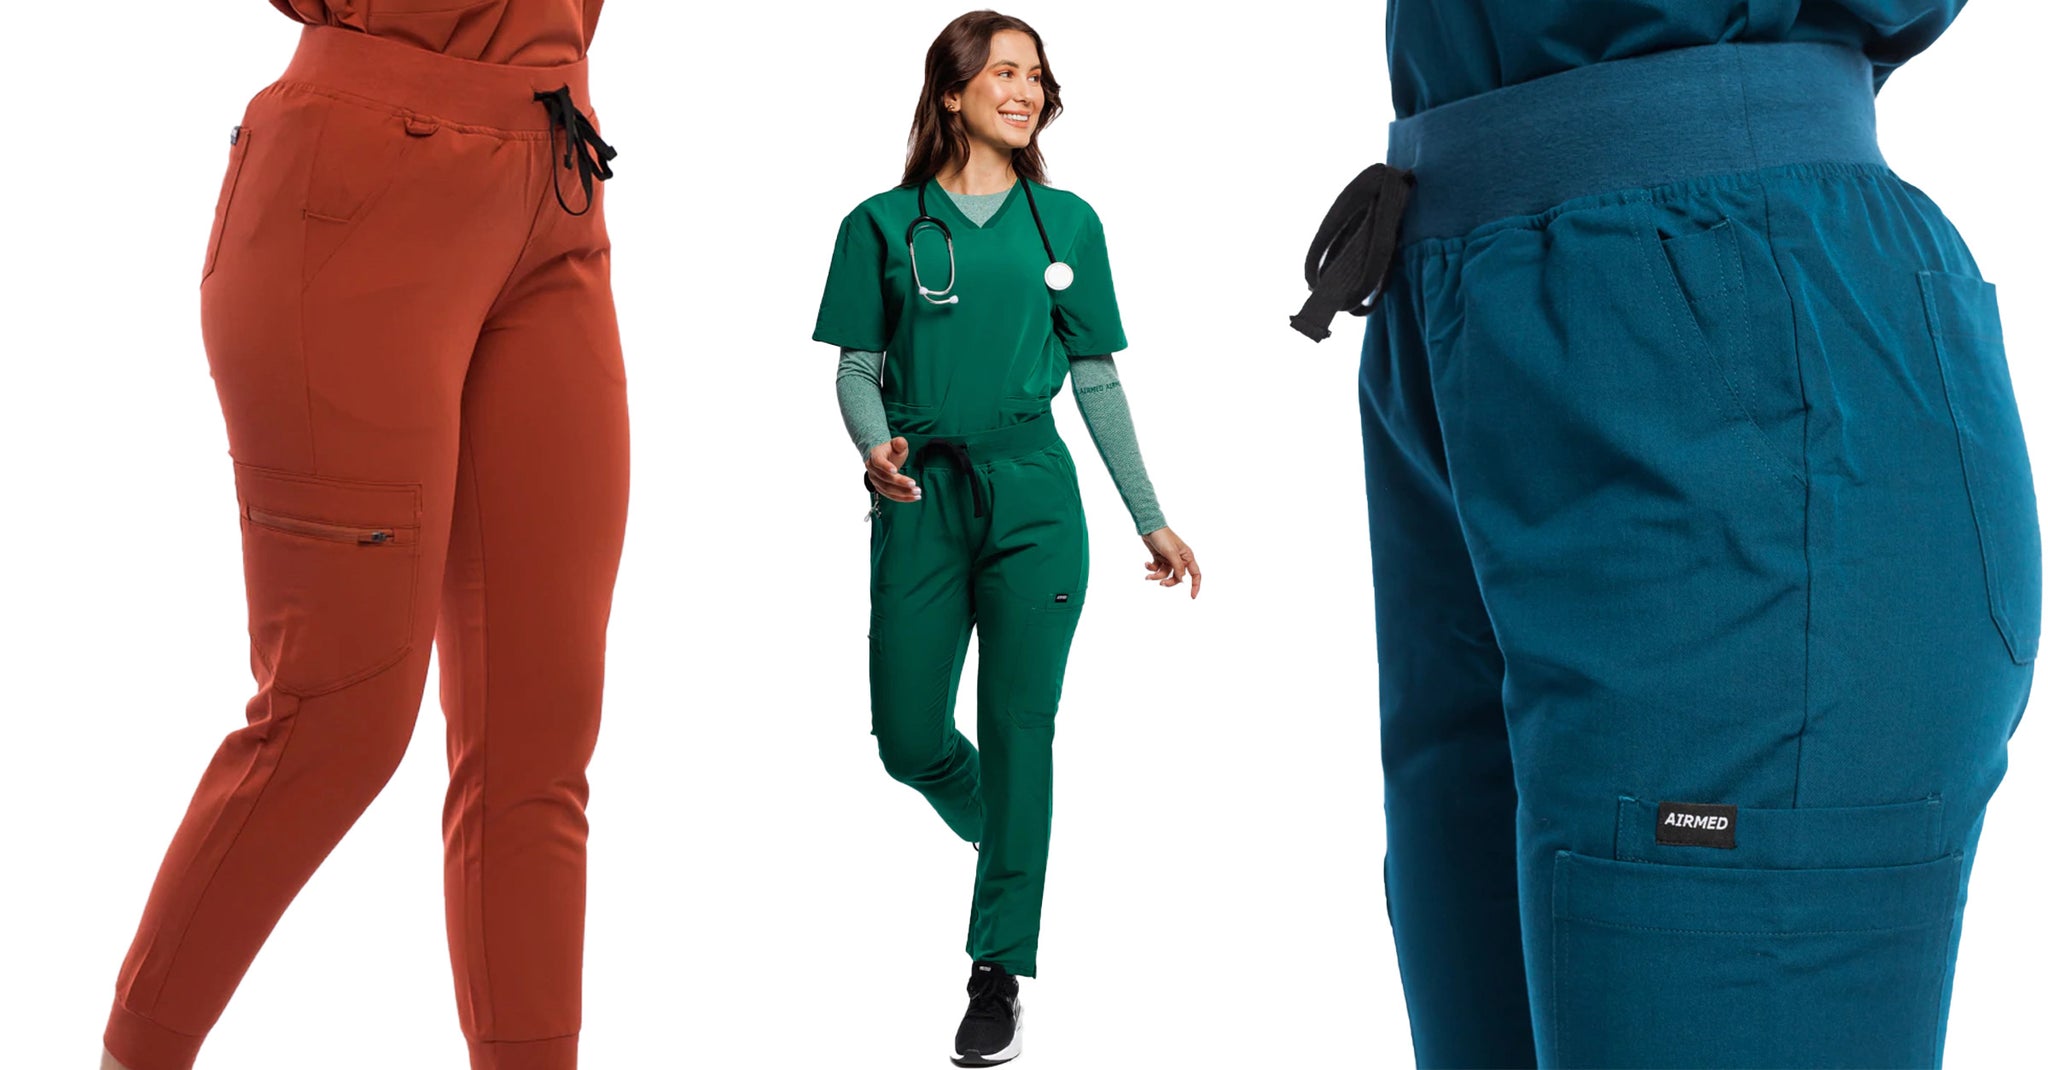 How and Where to Buy Good Fitted Scrubs Pants?